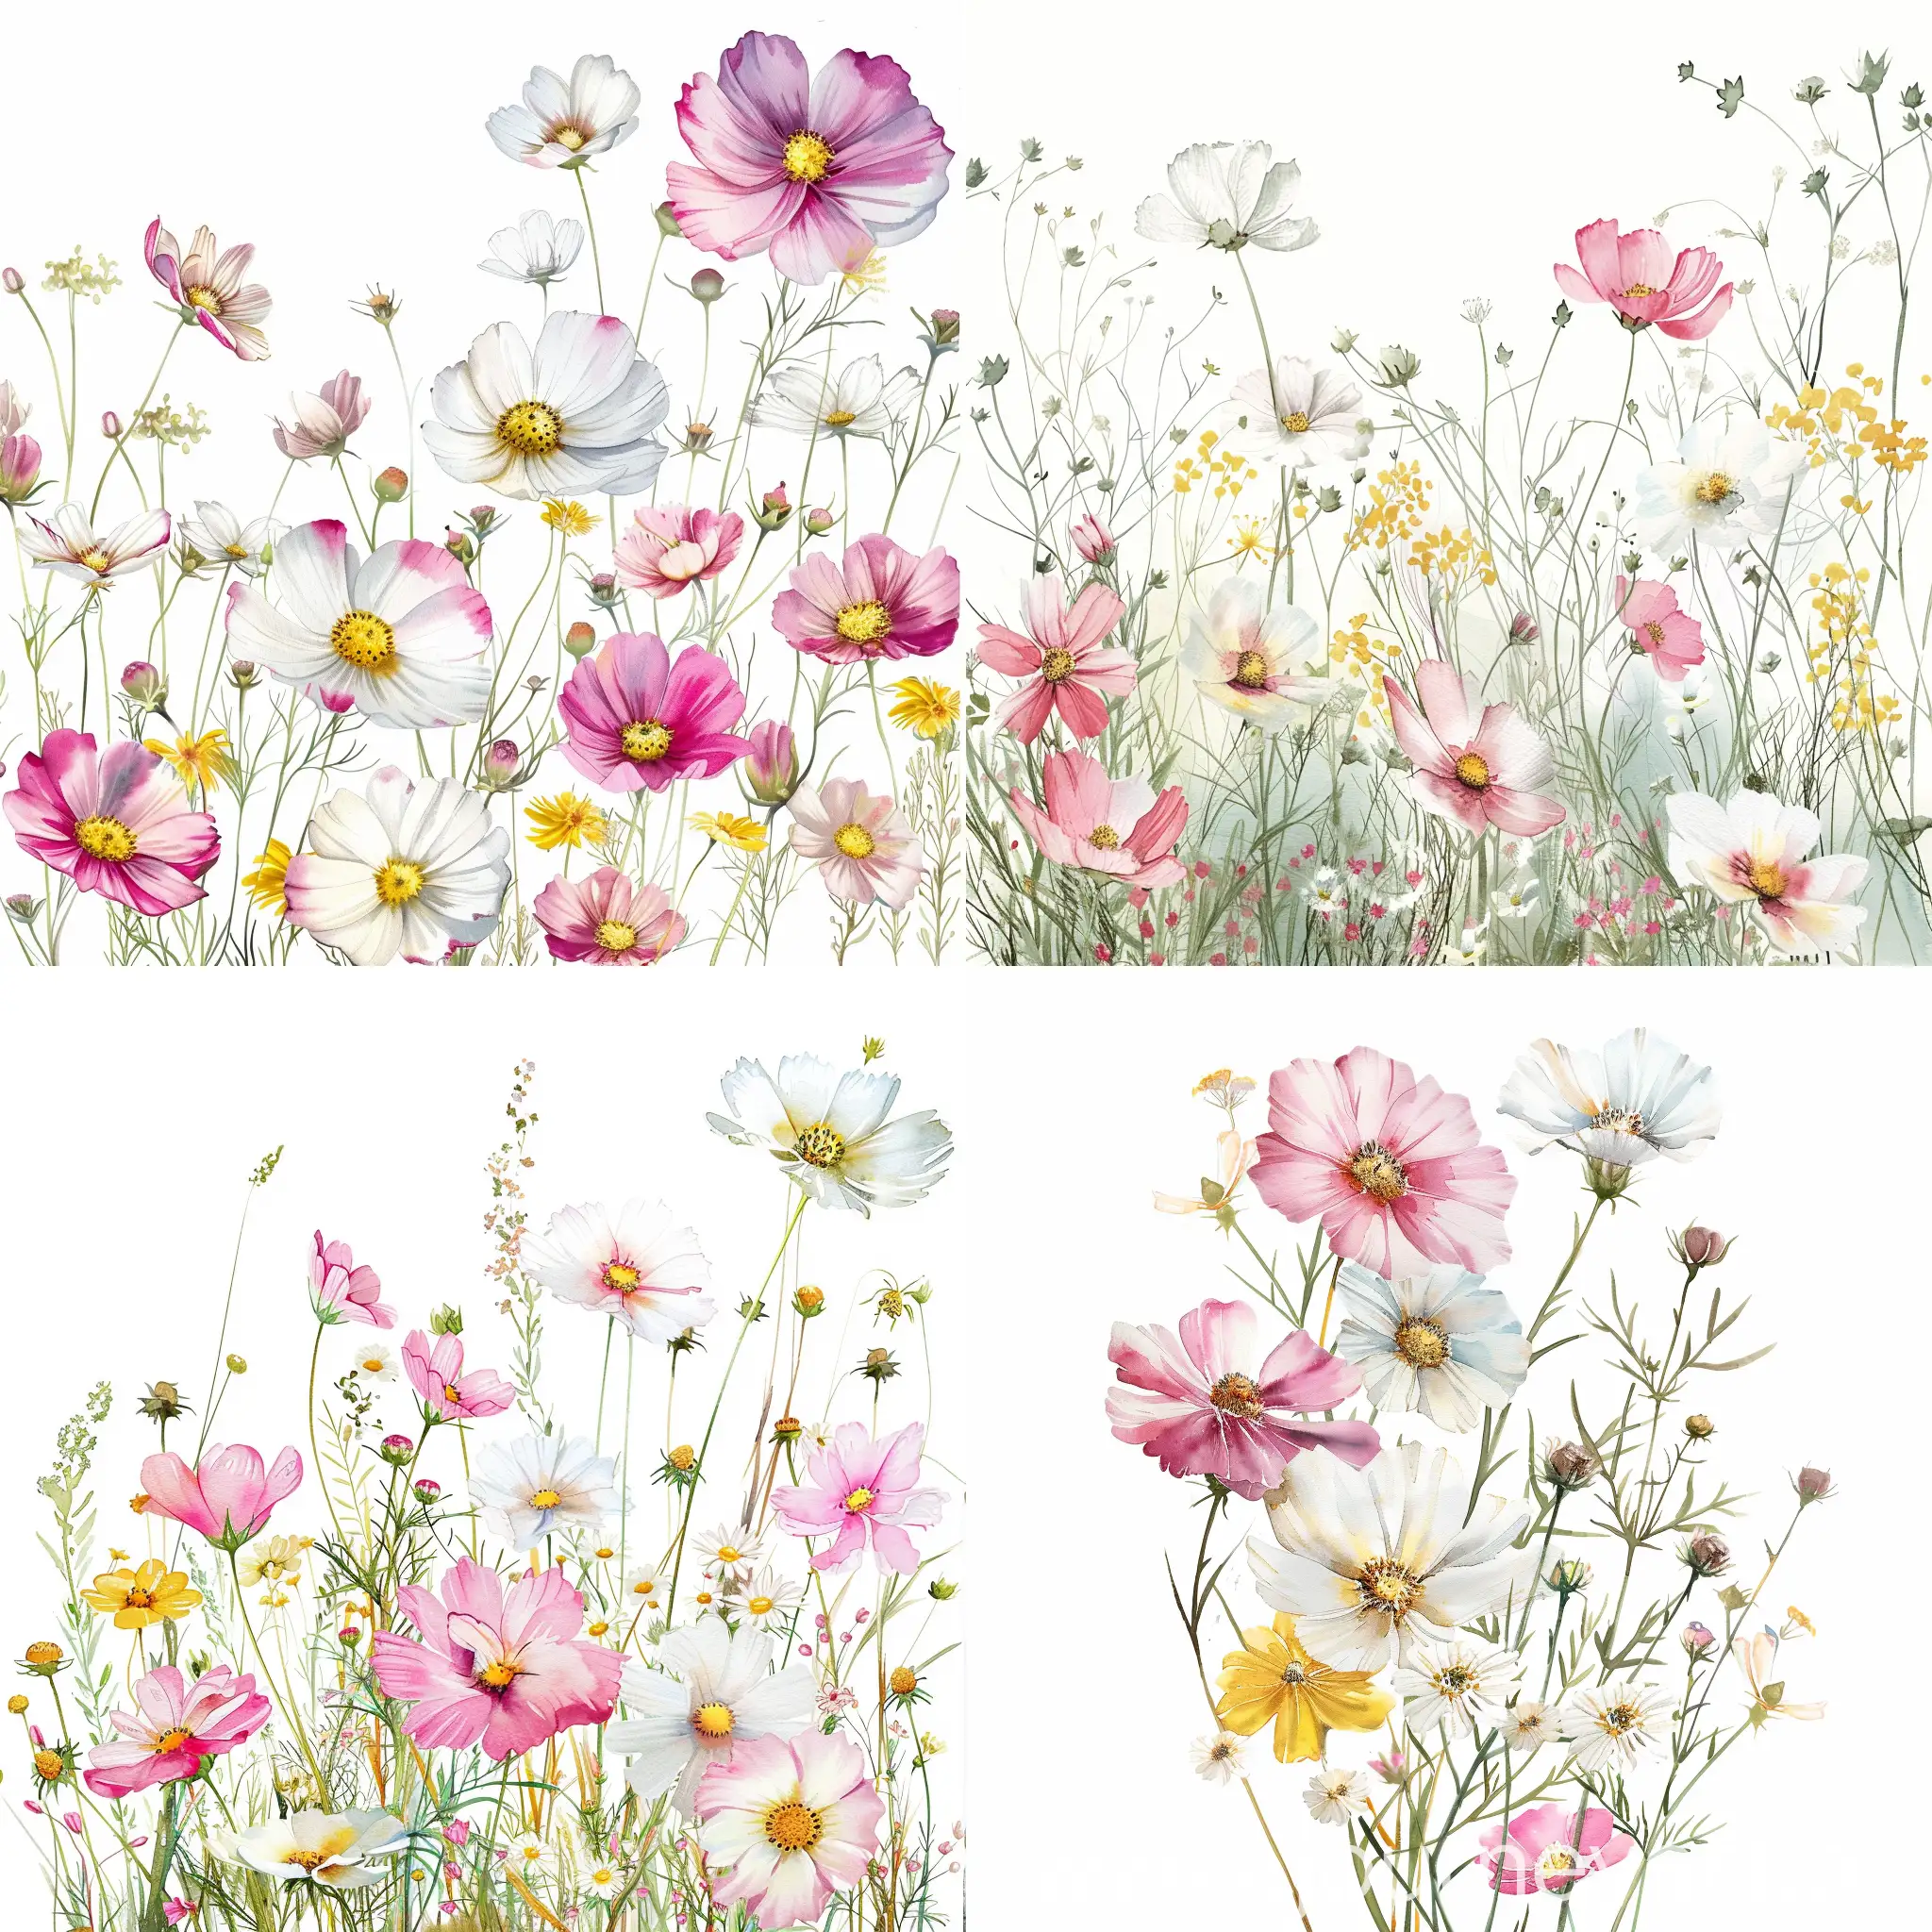 Ethereal-Watercolor-Wildflowers-Delicate-Pink-White-and-Yellow-Blossoms-on-White-Background